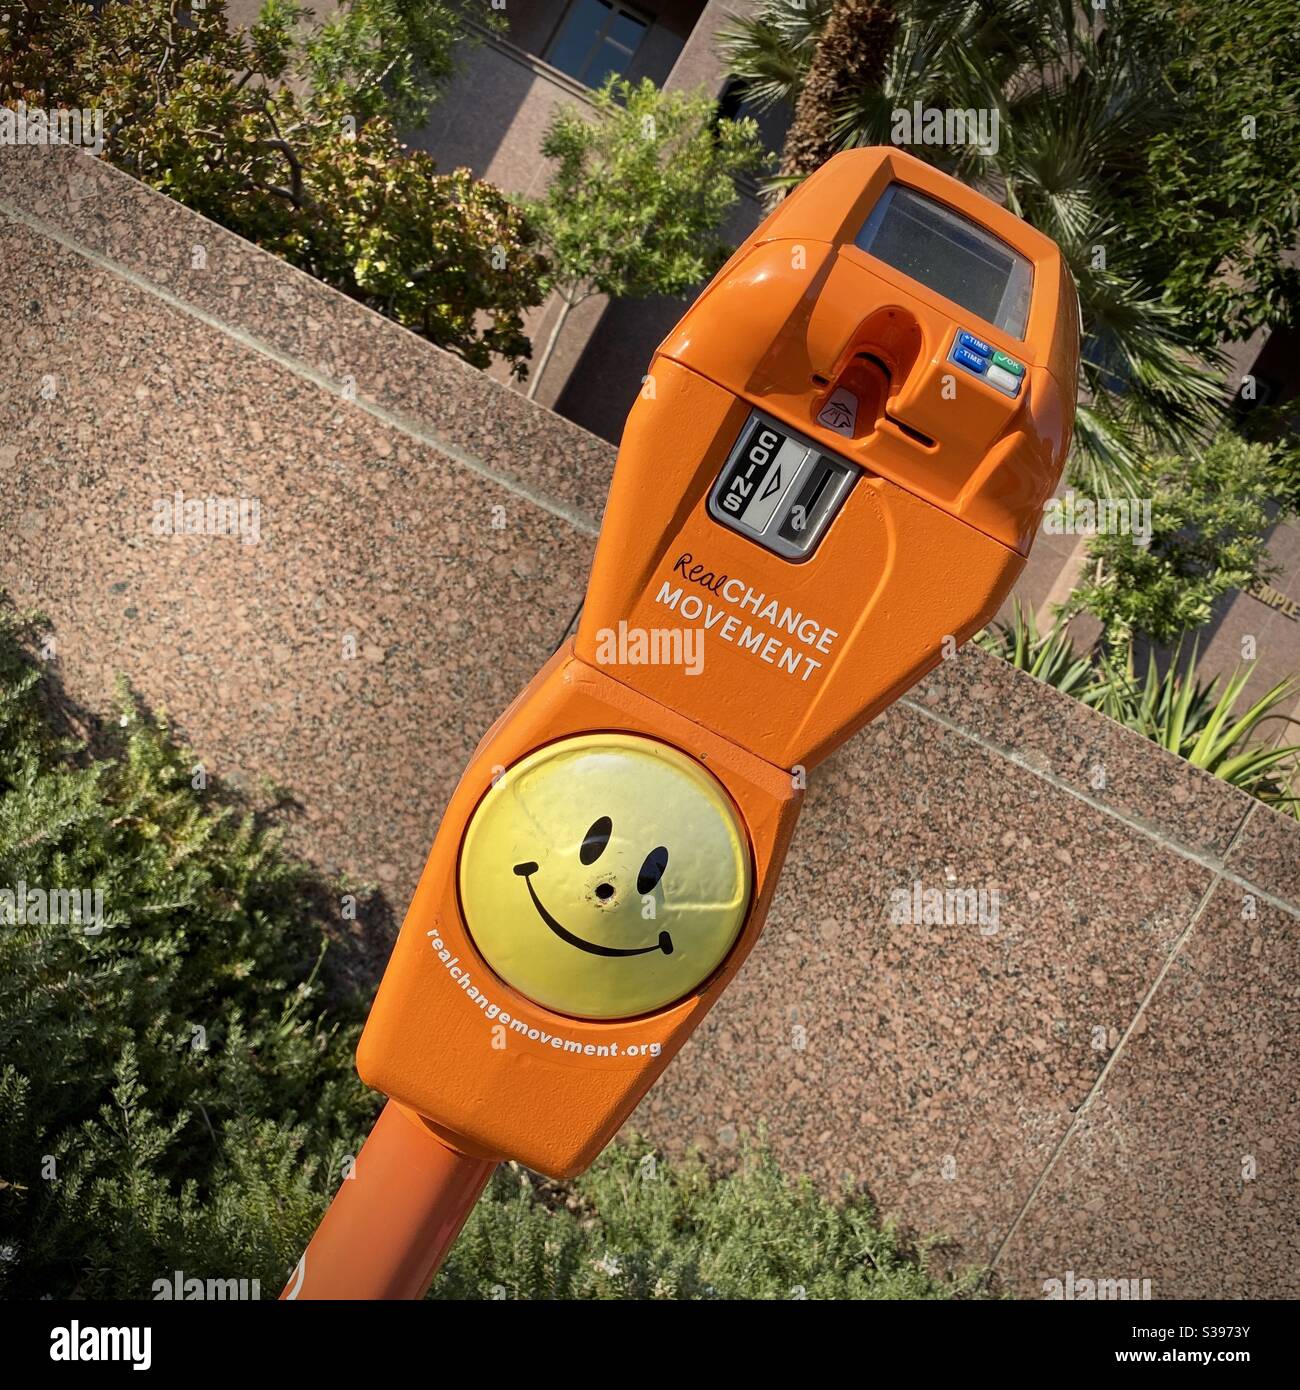 LOS ANGELES, CA, JUN 2020: strongly angled view of bright orange donation meter for Real Change Movement, a charity that helps homeless people. Grand Park in Downtown Stock Photo